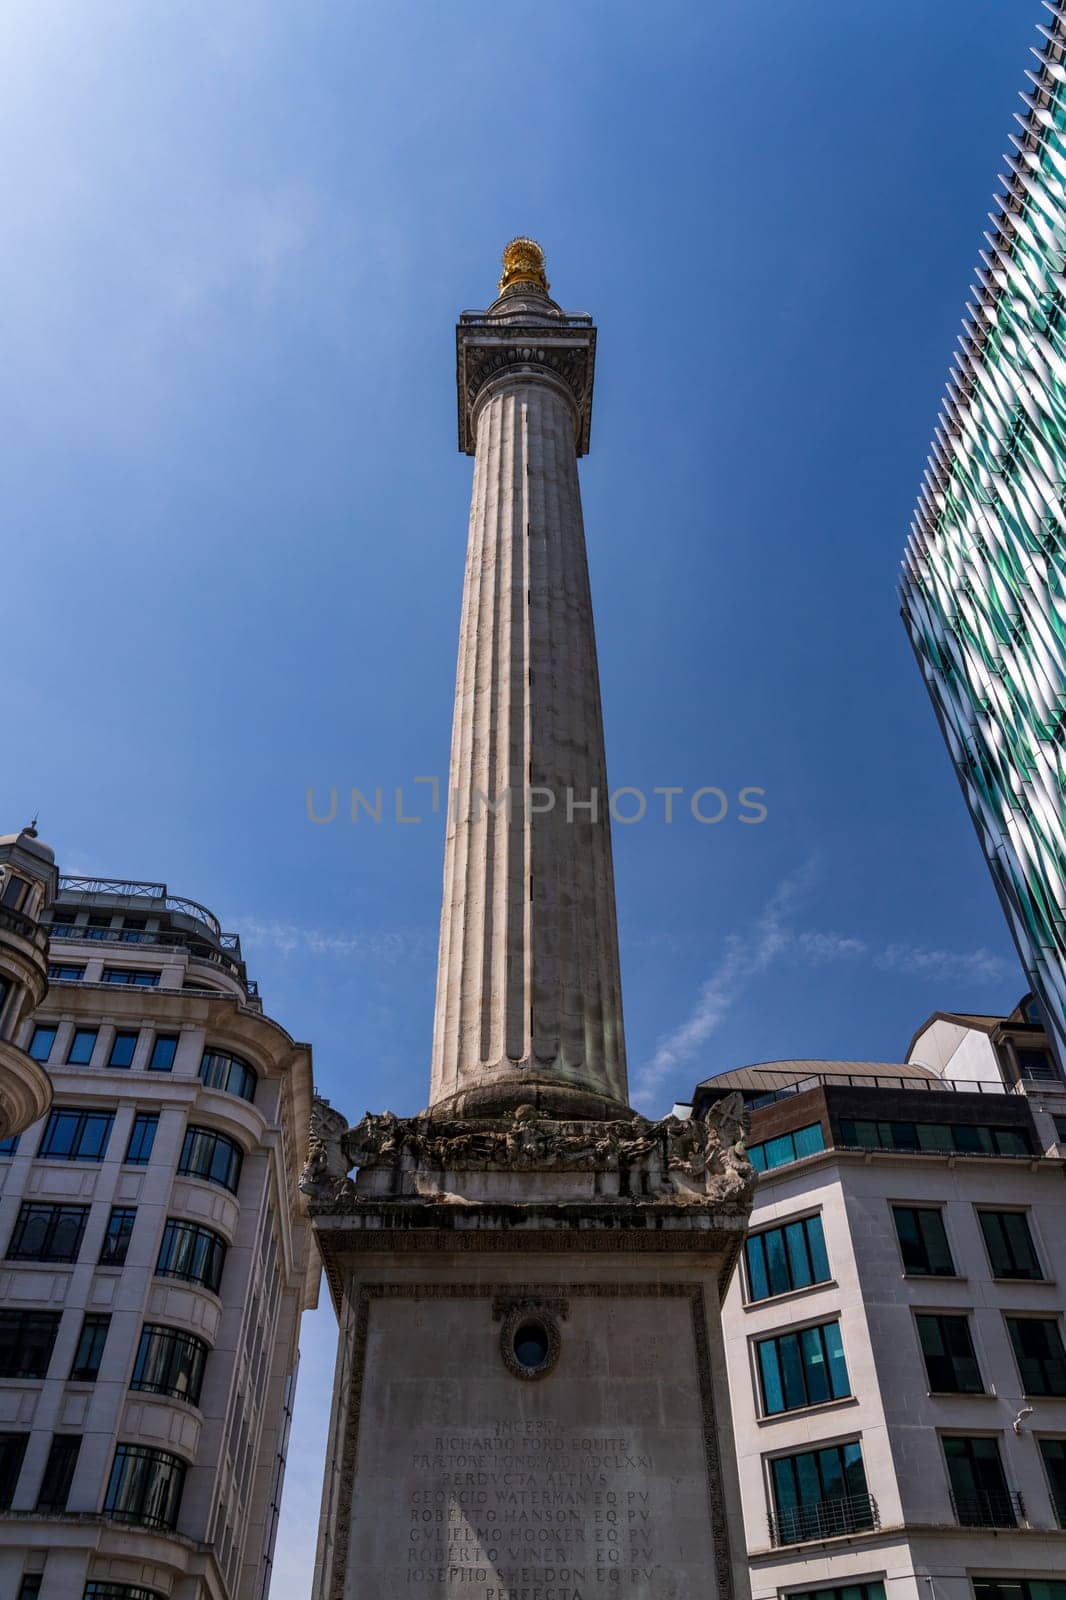 Modern architecture of offices surround the Monument to Great Fire of London